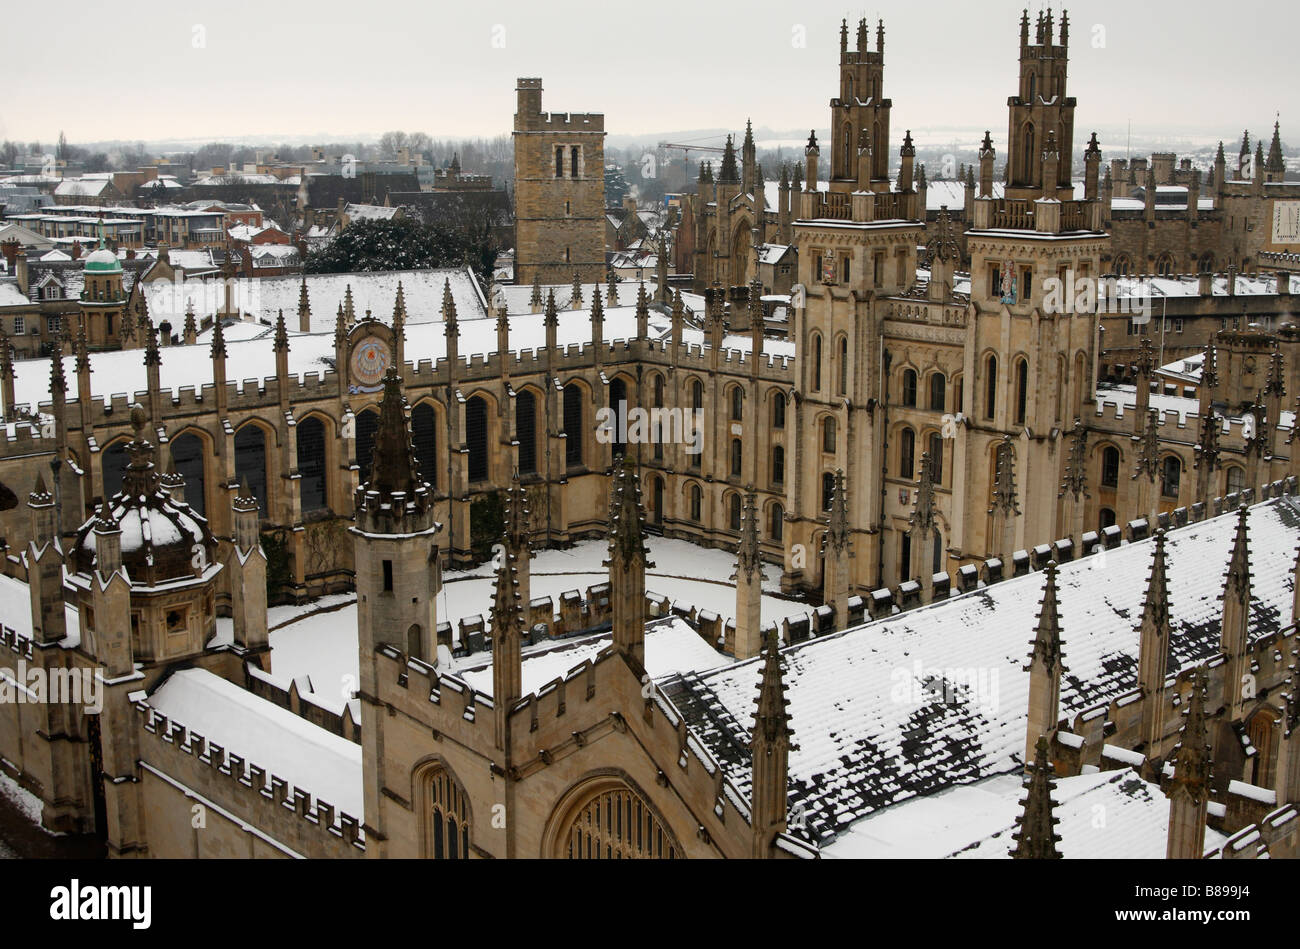 'All Souls' College in winter snow, view from top of [University Church of St Mary the Virgin] tower, Oxford, England, UK Stock Photo